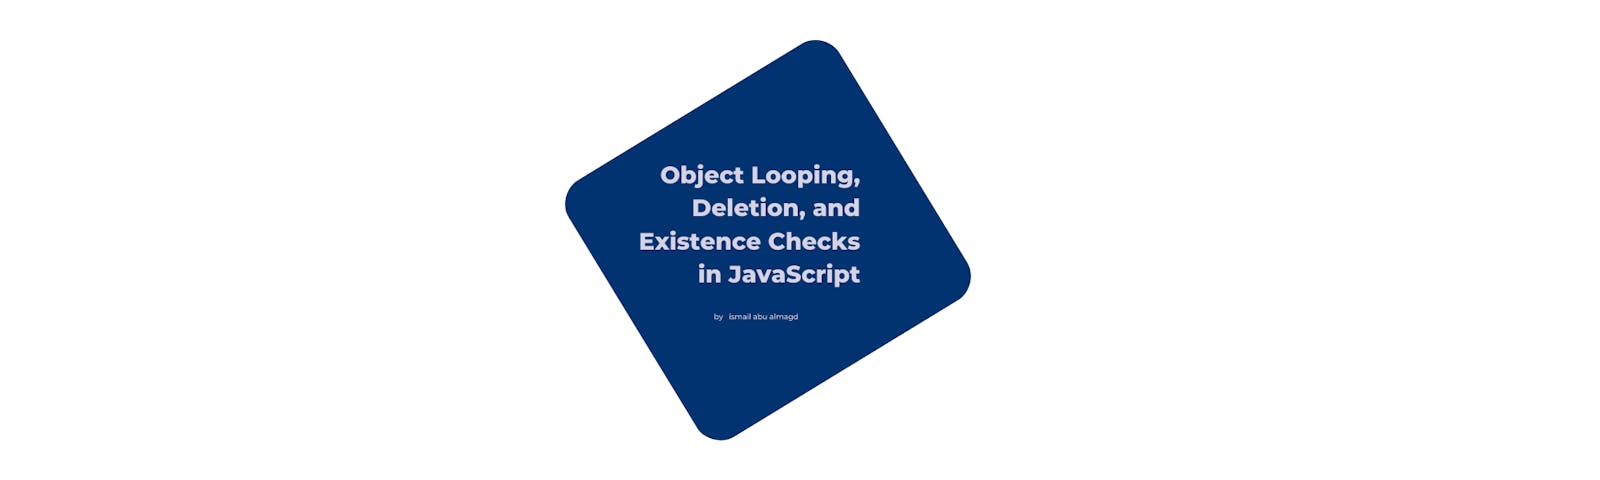 Efficient Object Looping, Deletion, and Existence Checks in JavaScript